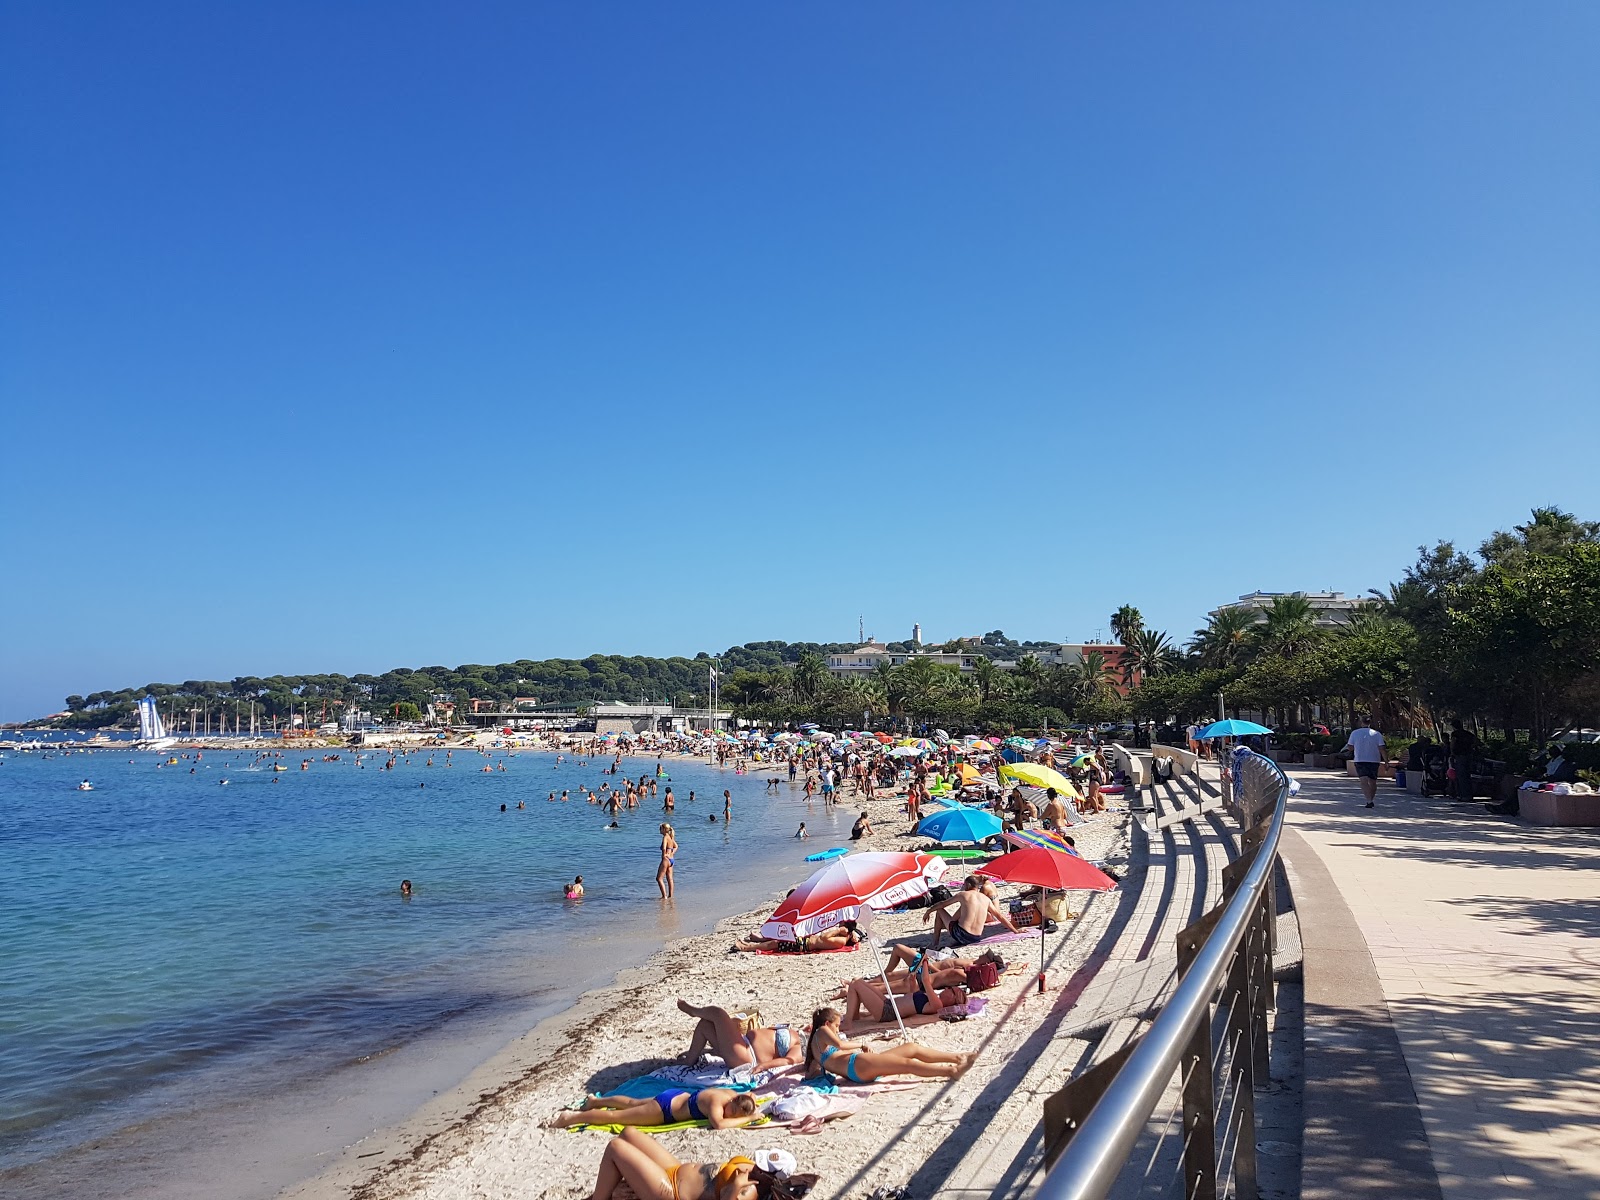 La Plage du Ponteil beach (Antibes, Maritime Alps) on the map with photos and reviews © BeachSearcher